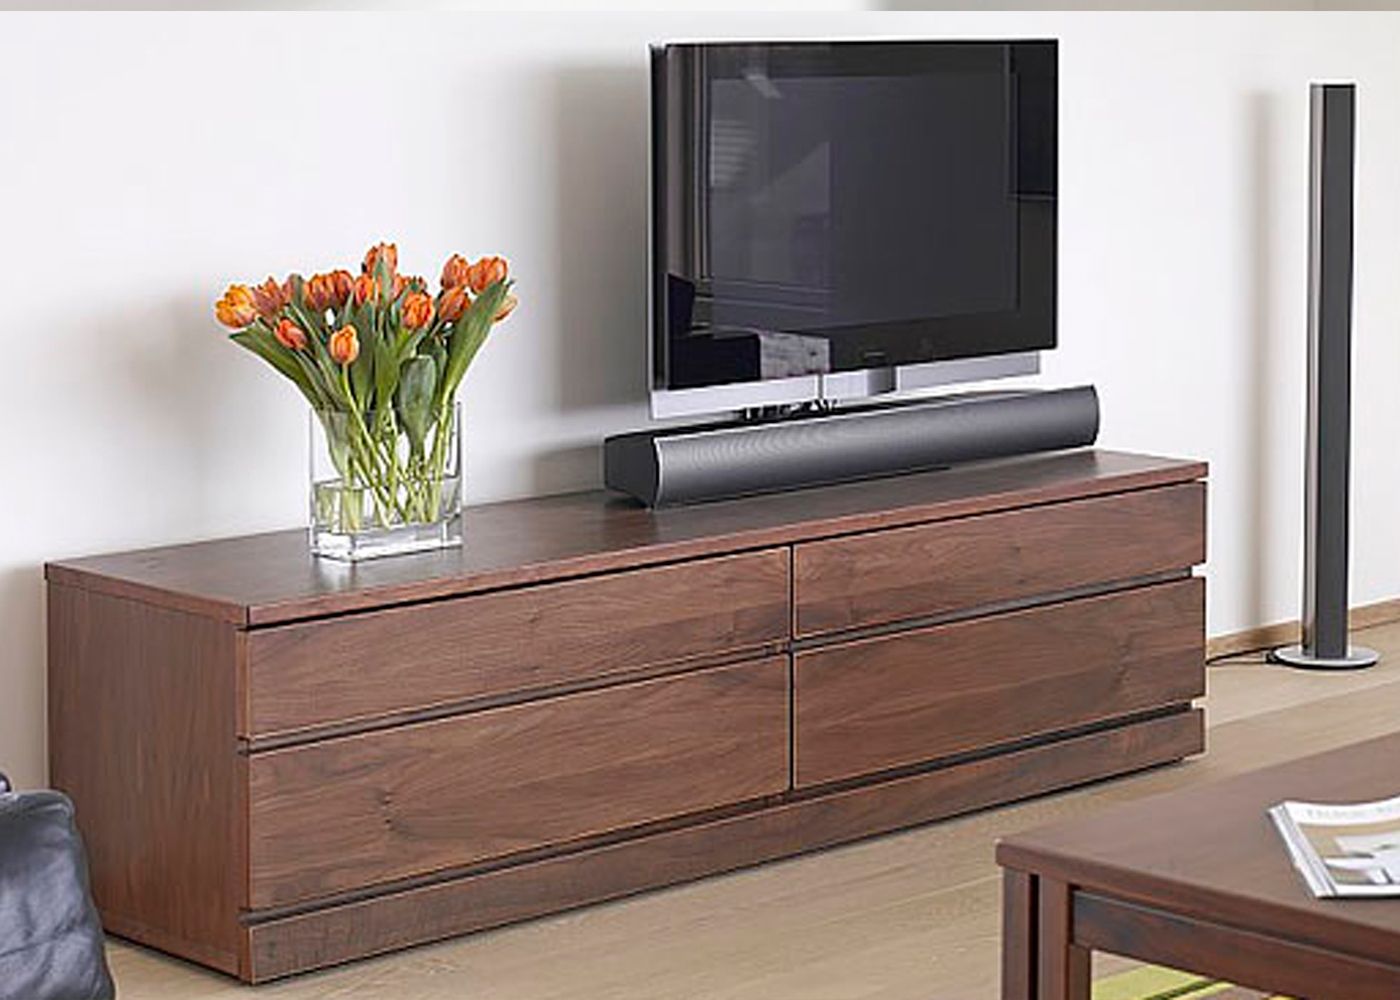 Skovby Sm87 Tv Cabinet In Walnut Finish 1 – Midfurn With Regard To Tv Stands And Cabinets (View 5 of 15)